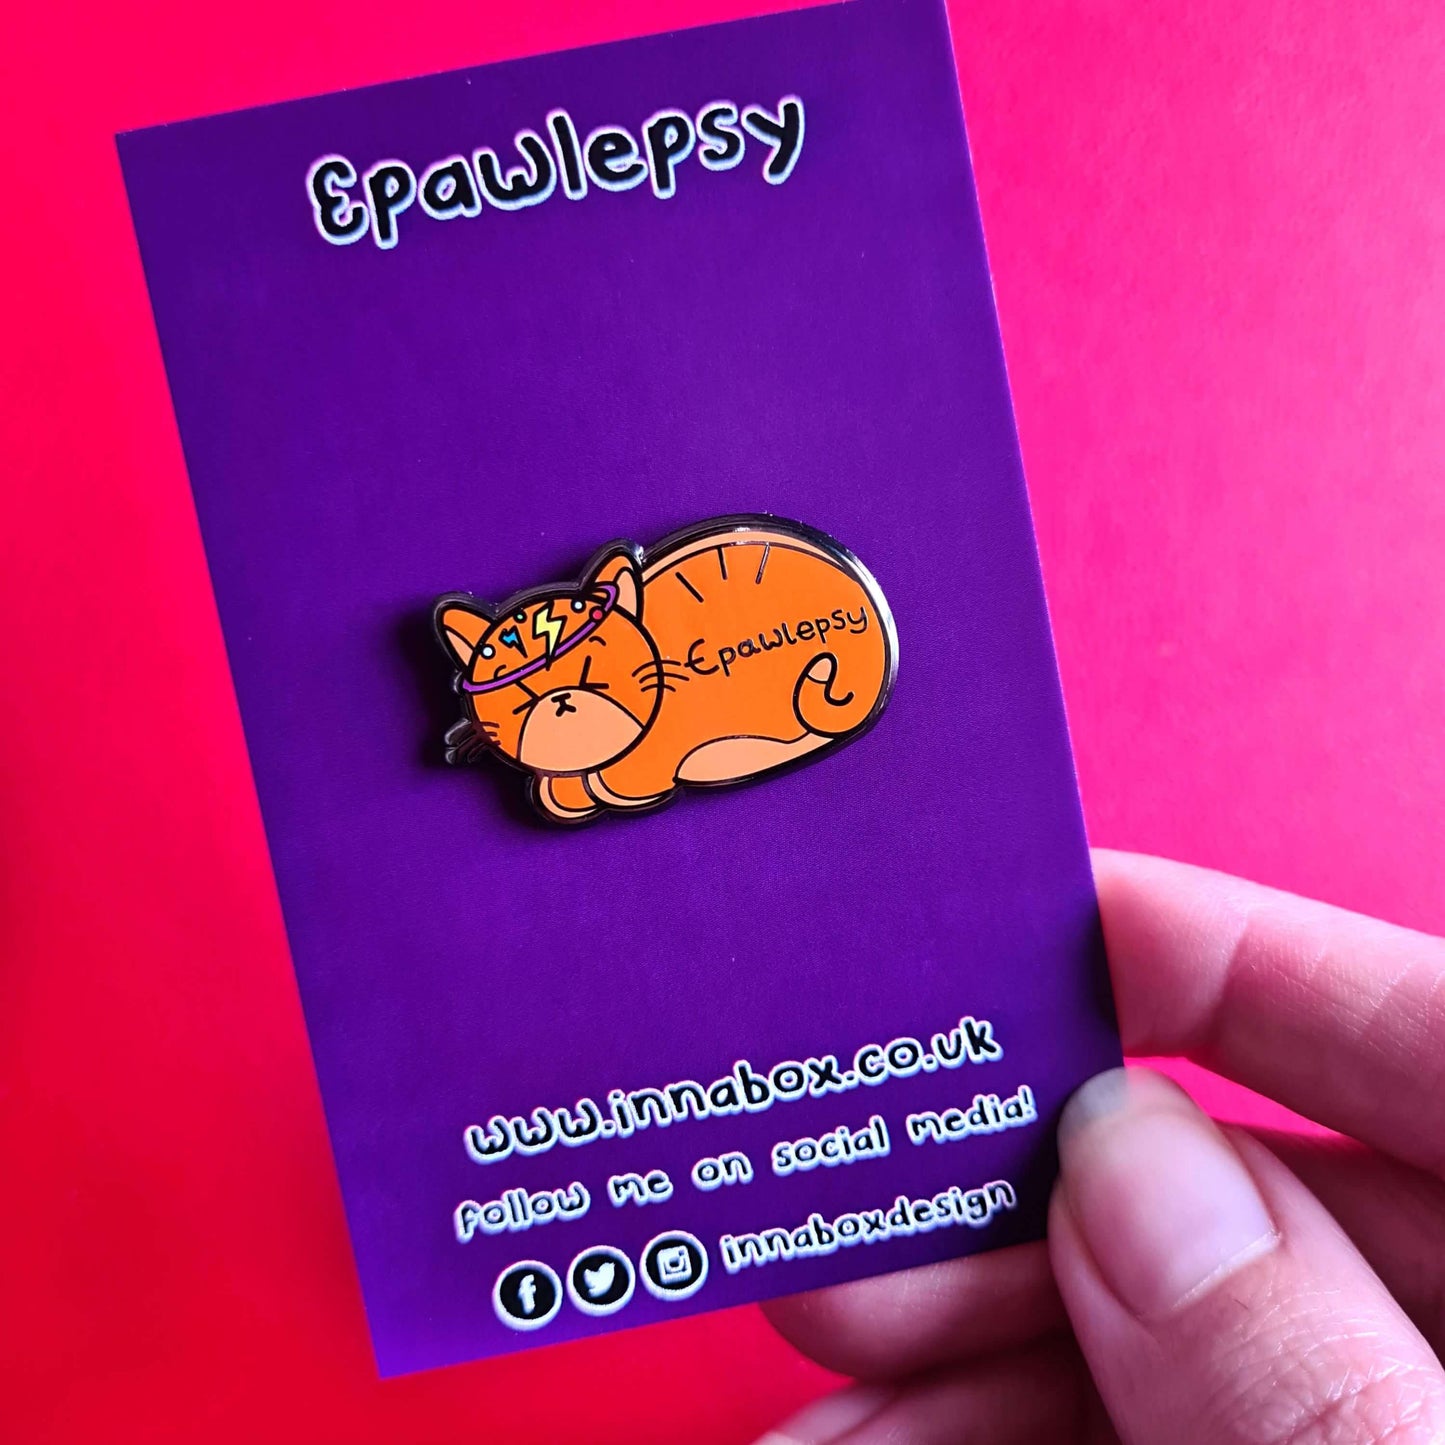 Epawlepsy Enamel Pin - Epilepsy on a purple backing card red background. The enamel pin is a ginger cat with eyes scrunched closed and symbols to represent a dizzy spell drawn across his head. Epawlepsy is written on the cats stomach. Enamel pin is designed to raise awareness for epilepsy